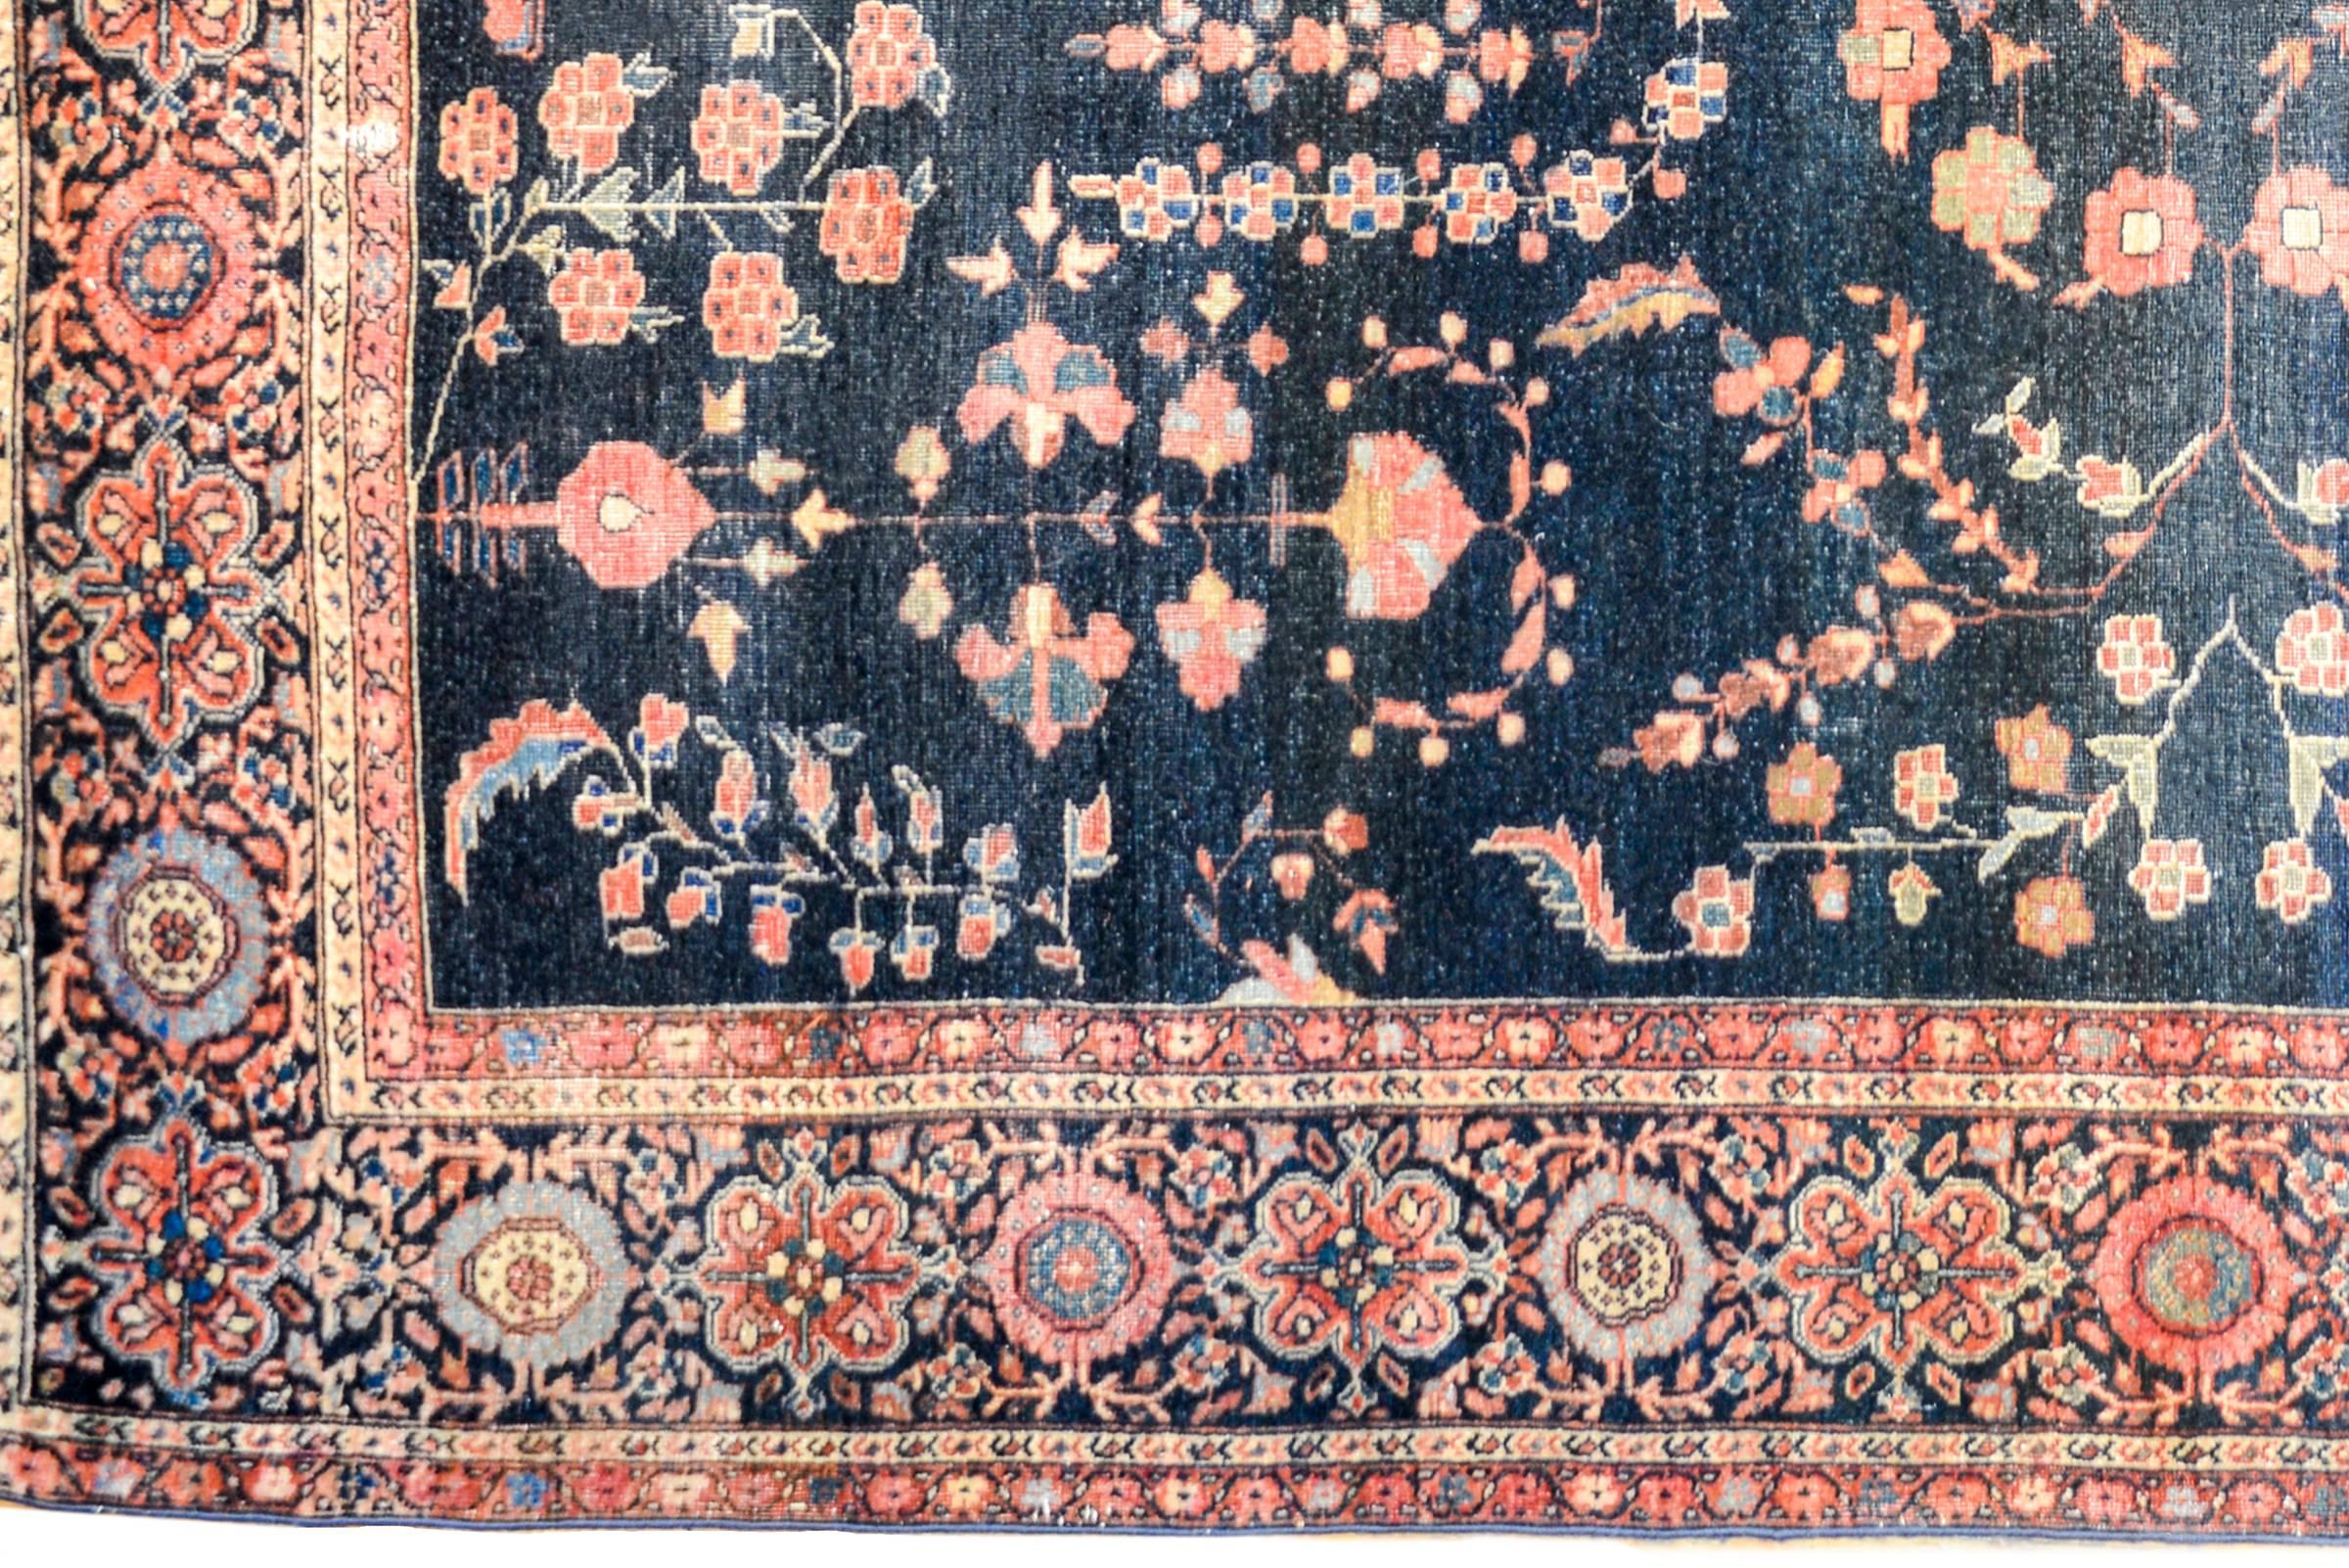 A wonderful and classic early 20th century Persian Sarouk Farahan rug with a traditional mirrored floral pattern woven in crimson, pink, and light indigo, on a dark indigo background. The border is contrasting with a wide densely woven floral and